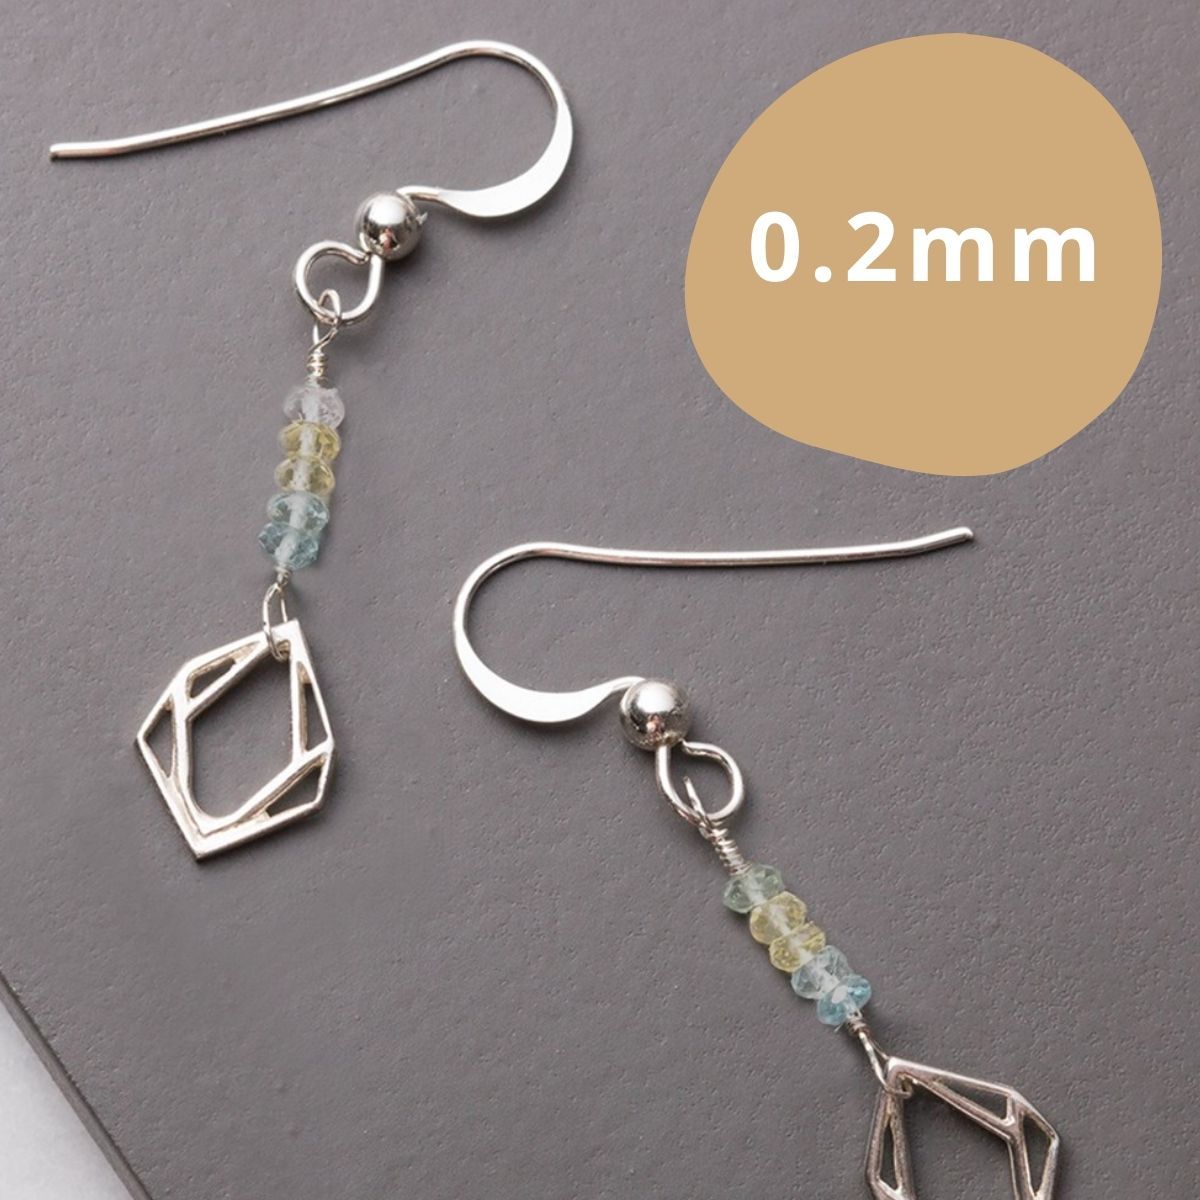 Compare Jewellery Designs Using Different Sized Wire